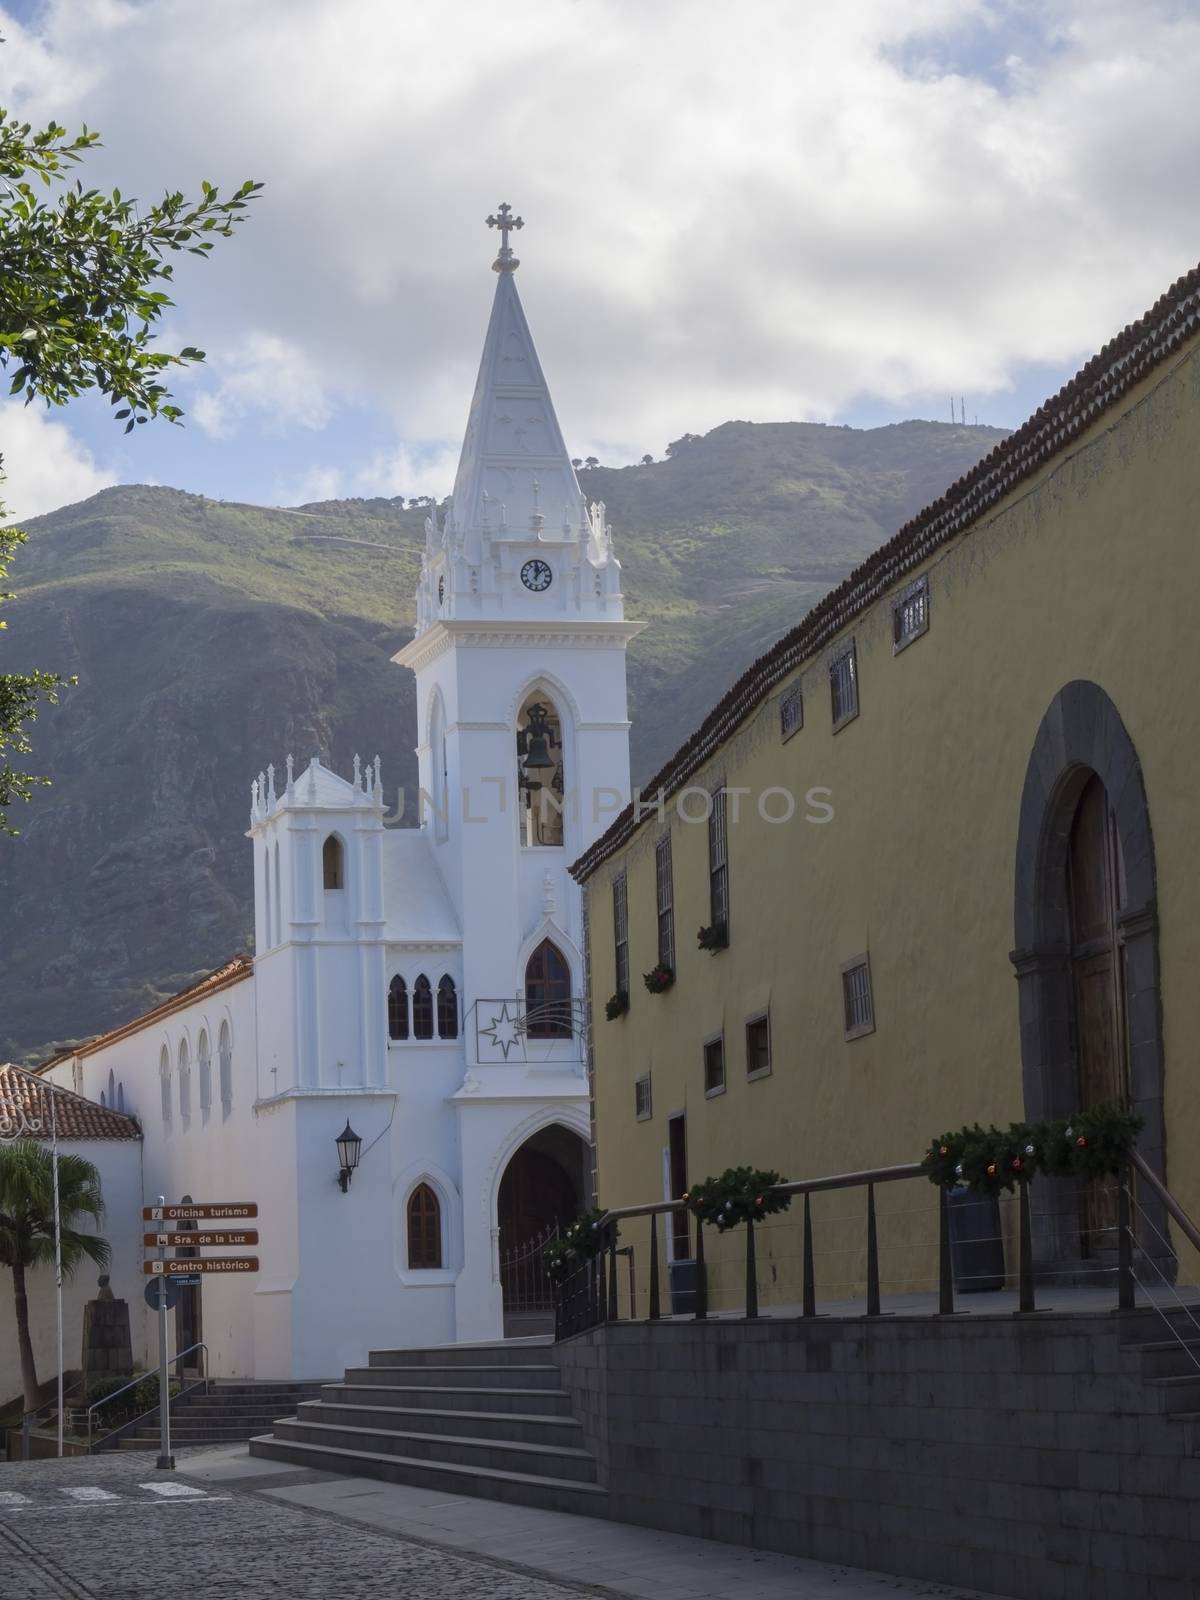 white church and historic buildings in old village Los Silos in tenerife Canary Islands with green hills in background by Henkeova